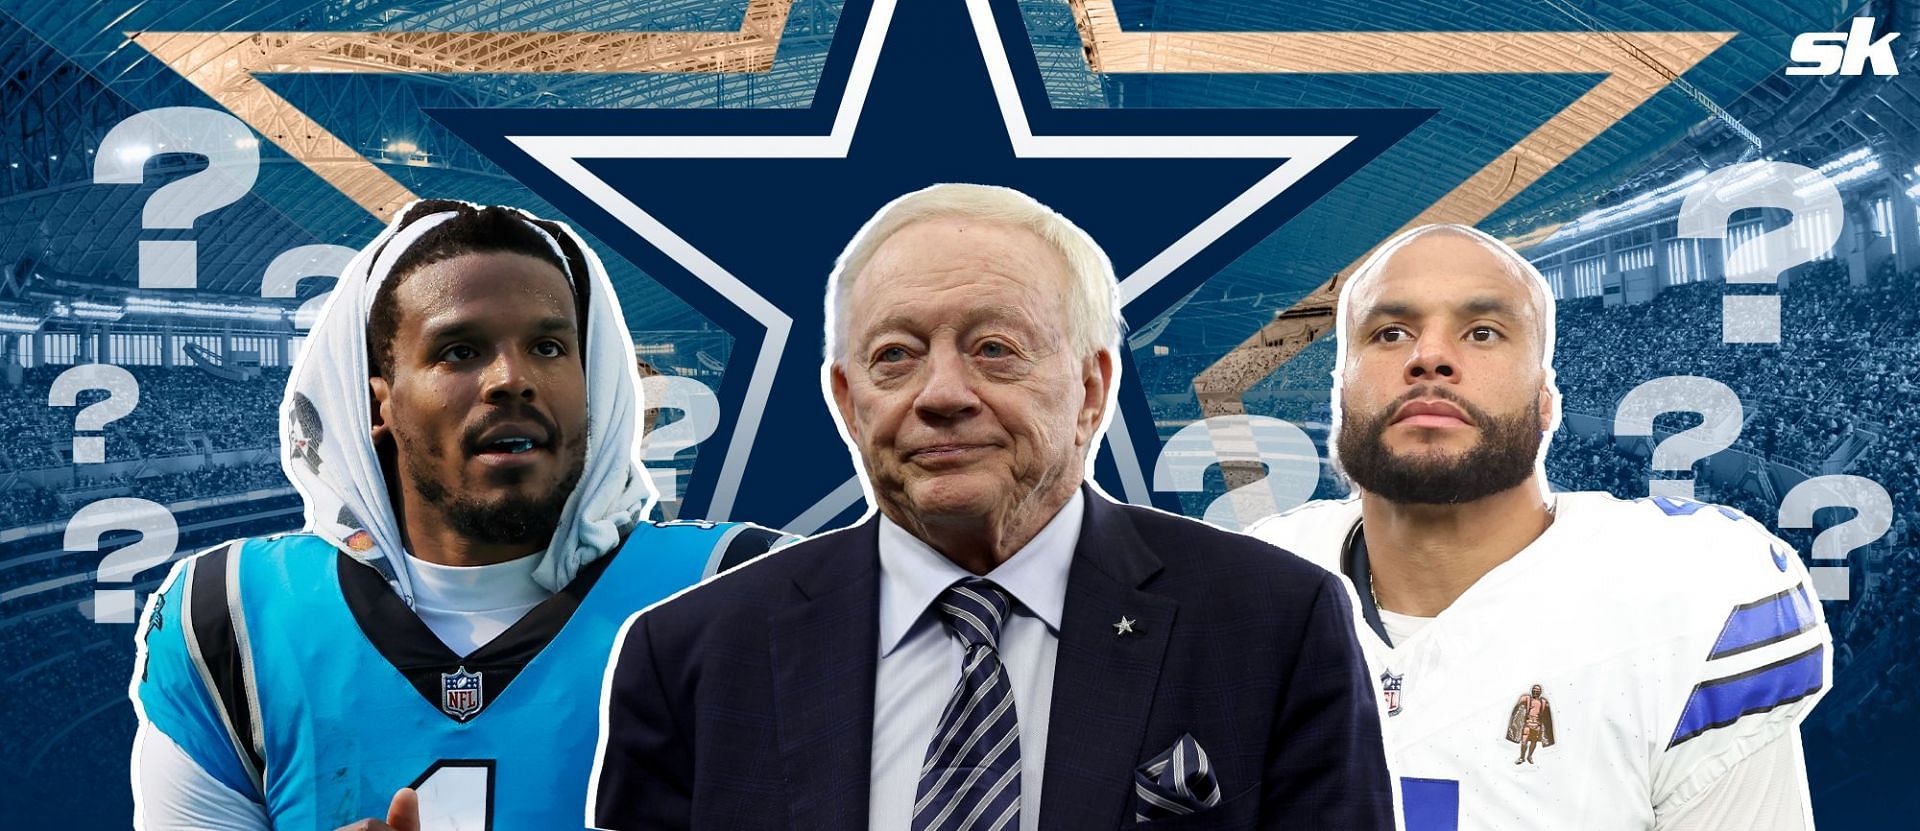 &ldquo;What the f&mdash;k have they done?&rdquo;: Cam Newton takes aim at &lsquo;trigger man&rsquo; Jerry Jones, wants Cowboys stripped of &lsquo;America&rsquo;s Team